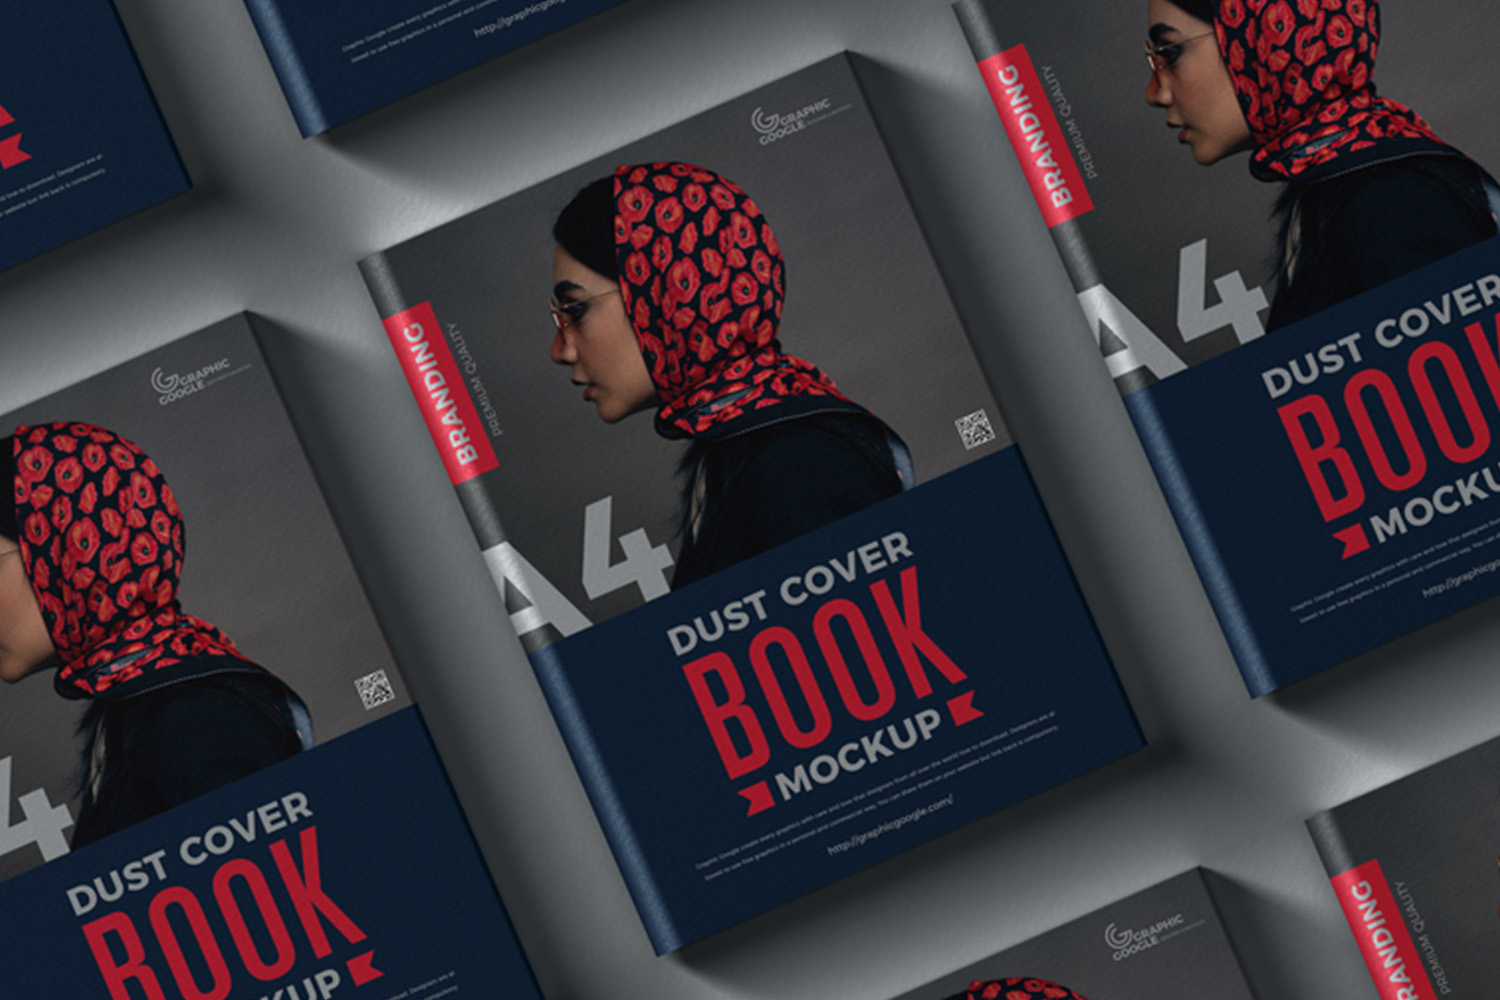 Dust Cover Branding A4 Book Mockup Free Download